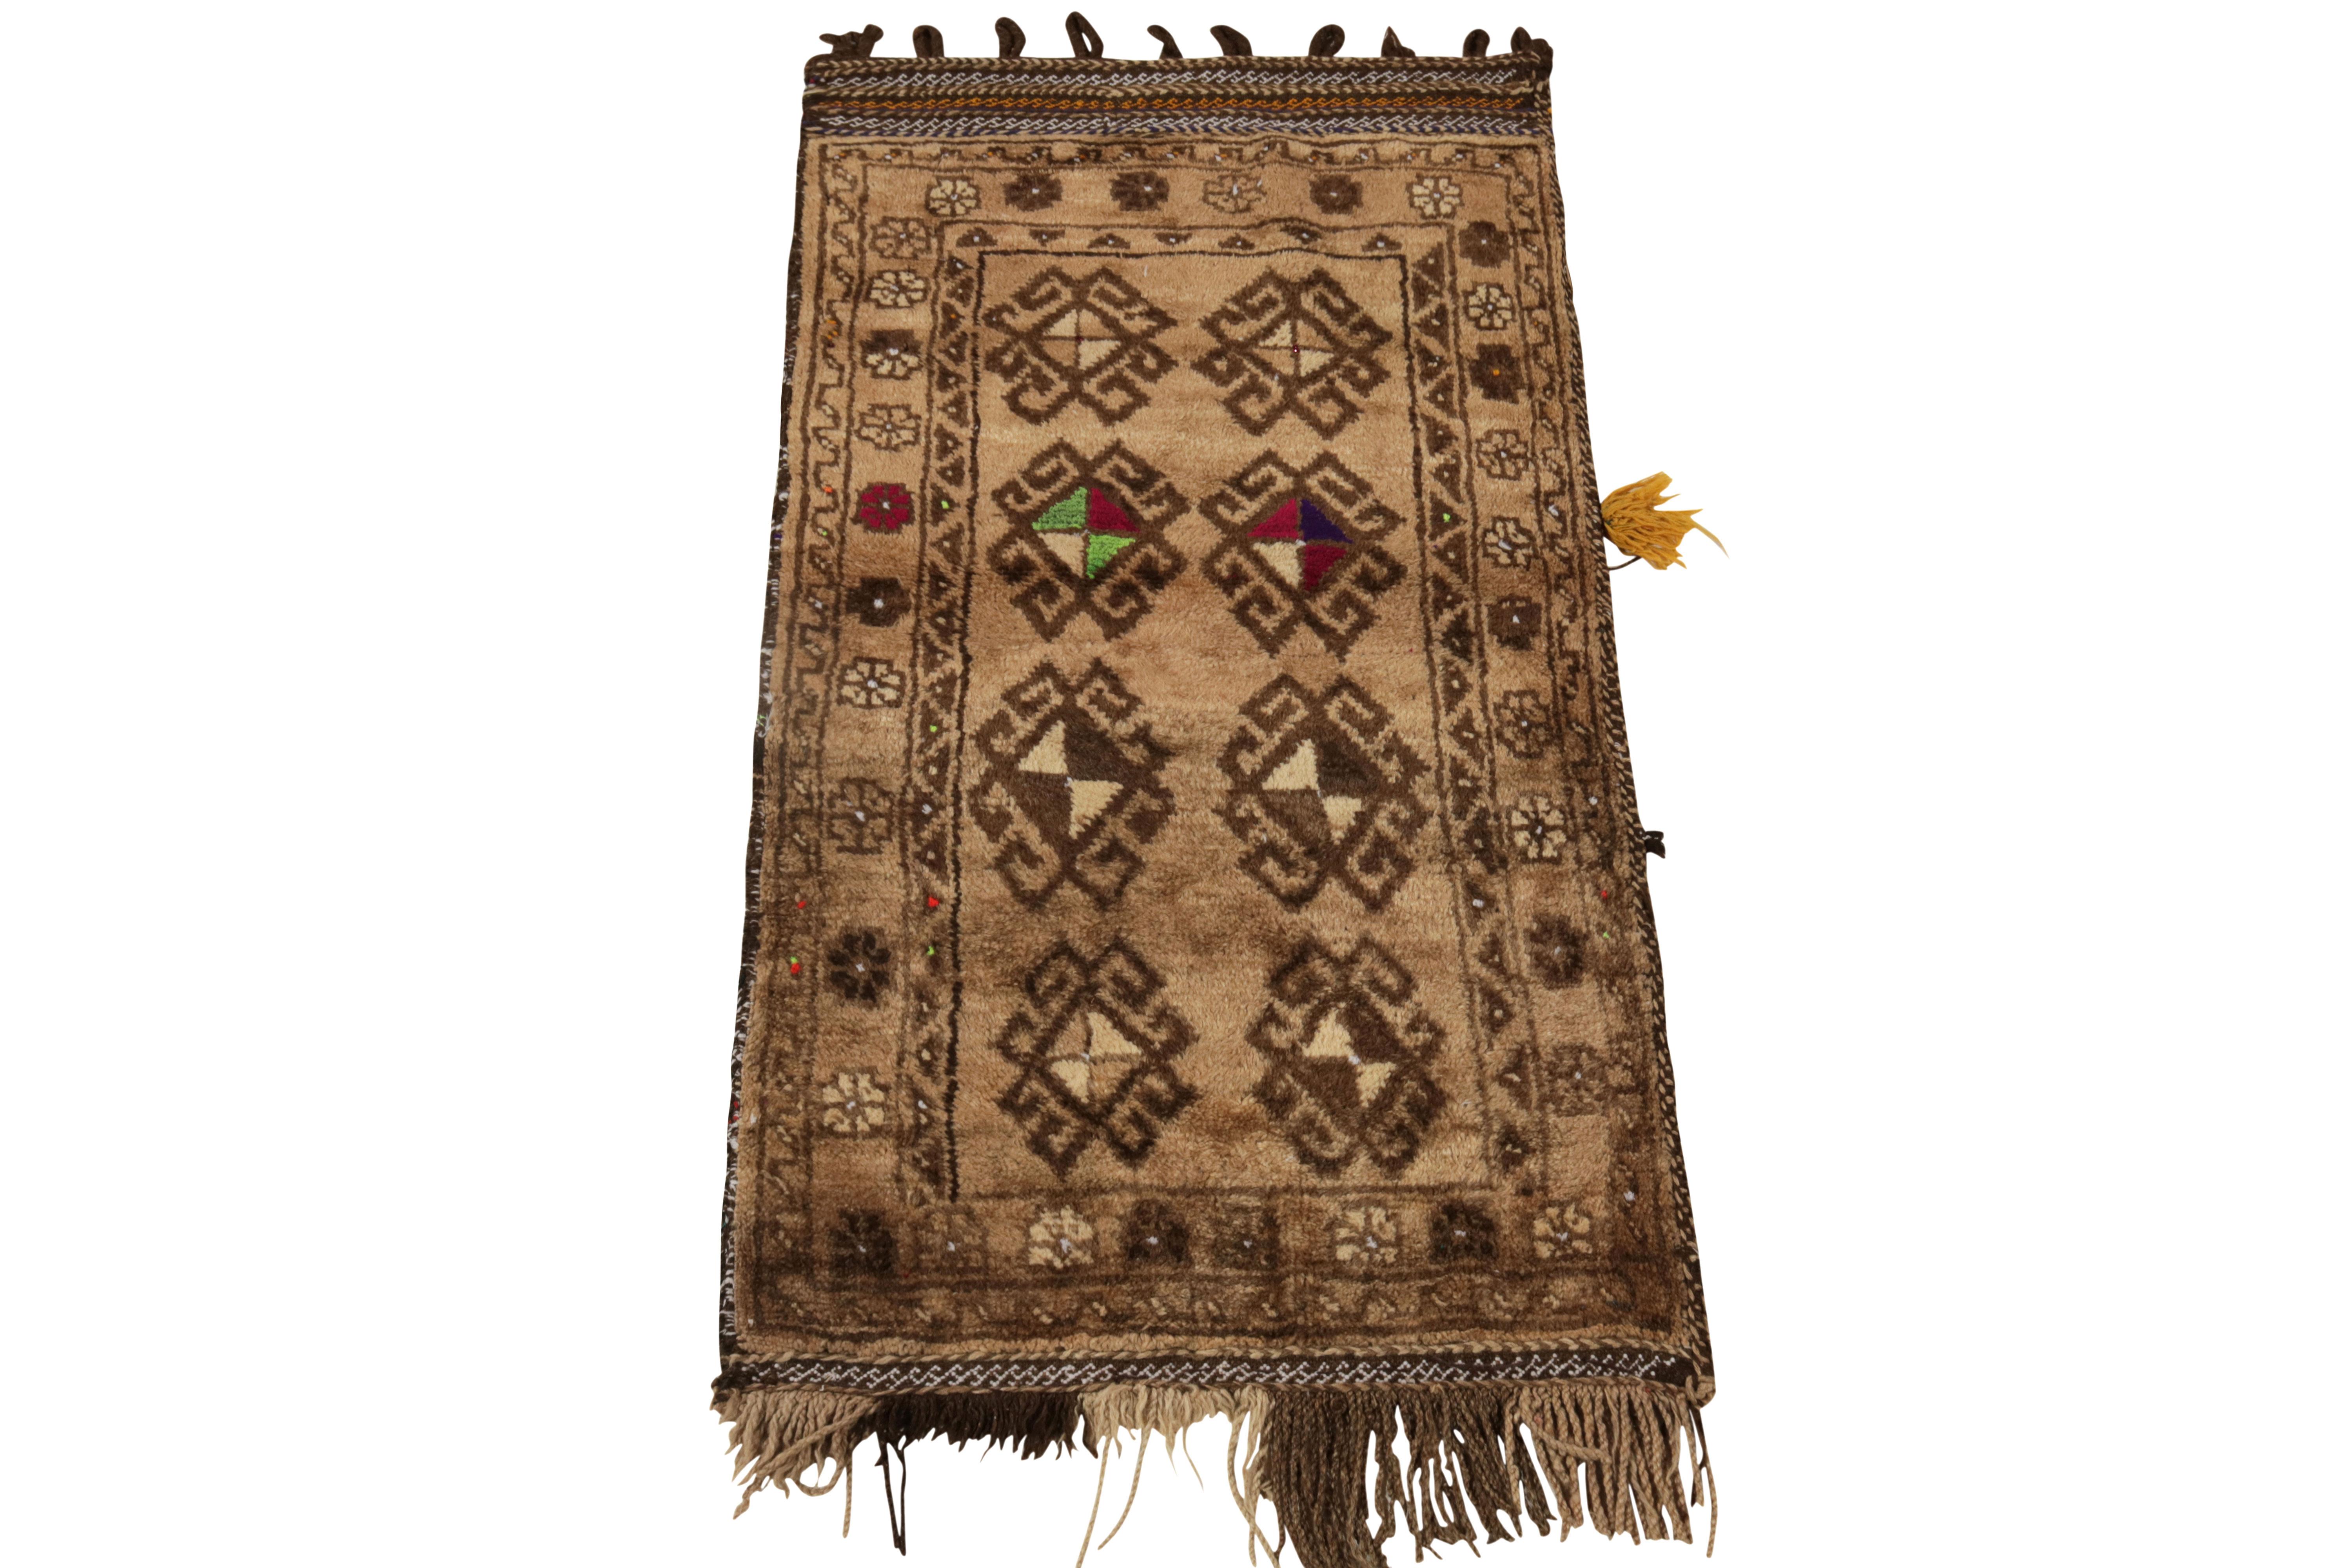 Paying tribute to the nomadic sensibilities of Baluchistan, a xX4 antique Baluch rug coming from Persia circa 1920-1930. The tribal style displays a montage of latch hook medallions & traditional motifs in light brown & beige colorways lying